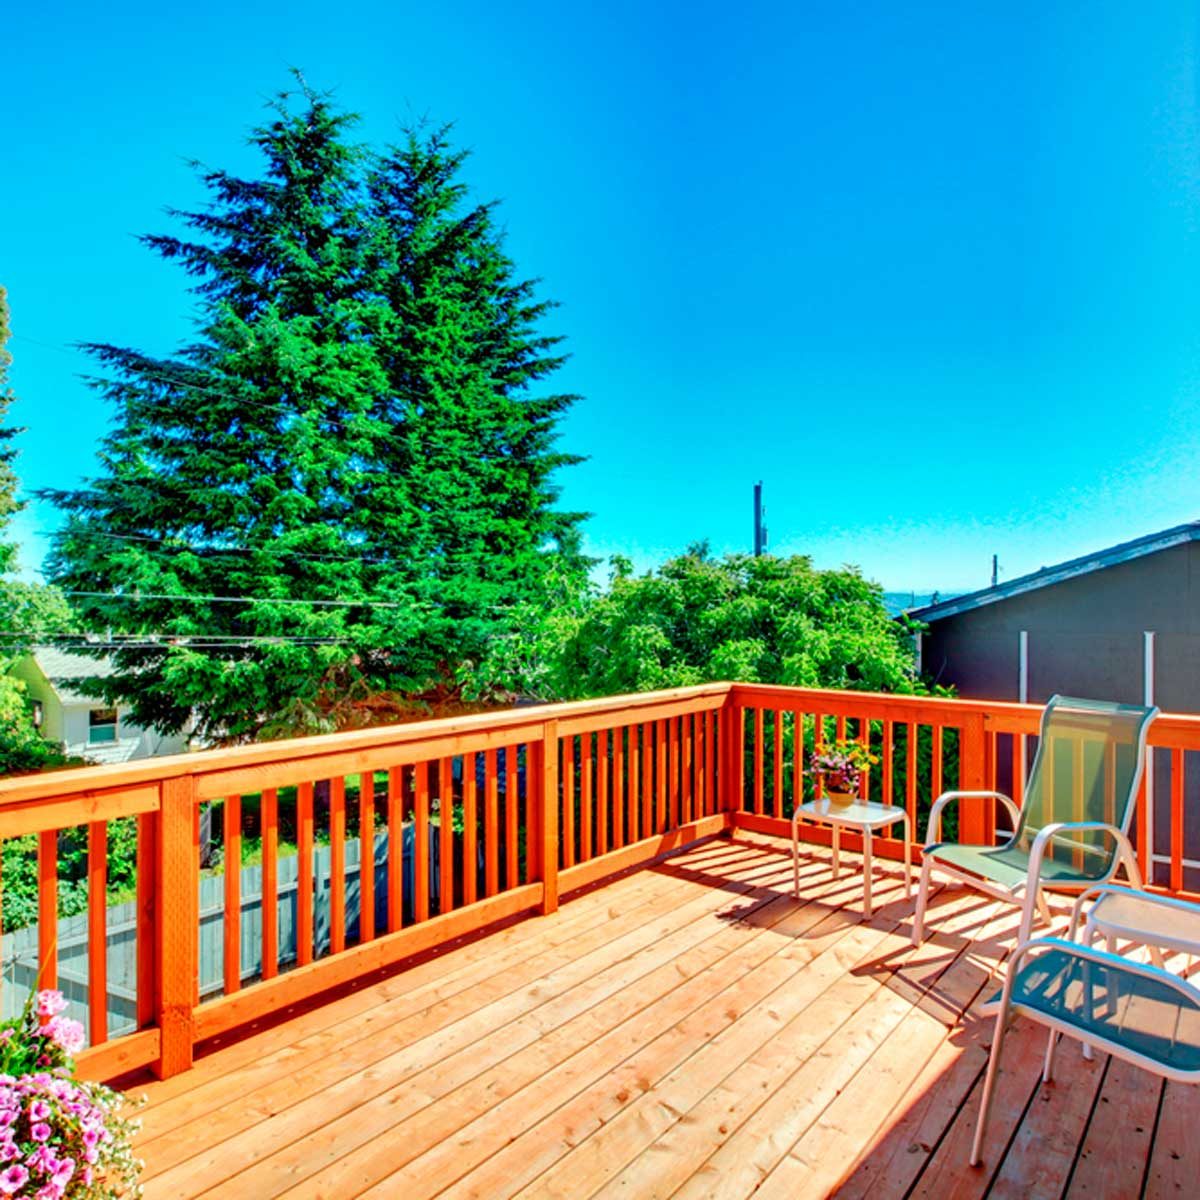 6 Deck Building Tips to Help You Perfect the Details